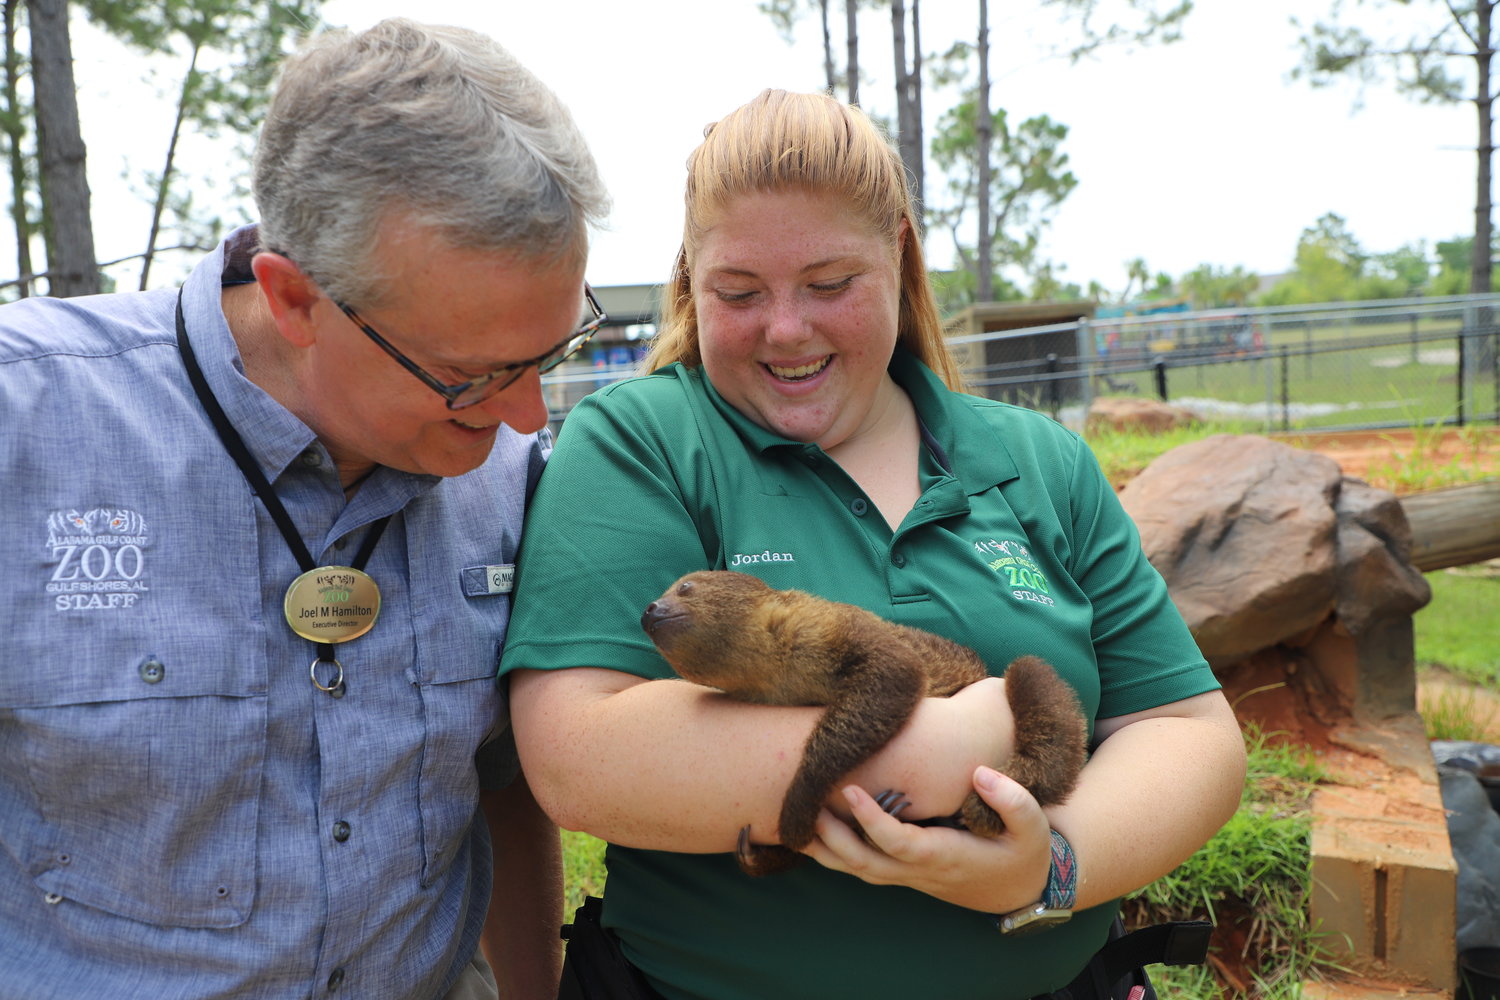 Alabama Gulf Coast Zoo Executive Director Joel Hamilton and Jordan Danflous, a guest engagement keeper, admire the zoo’s newest addition, a three-month-old Southern two-toed sloth.